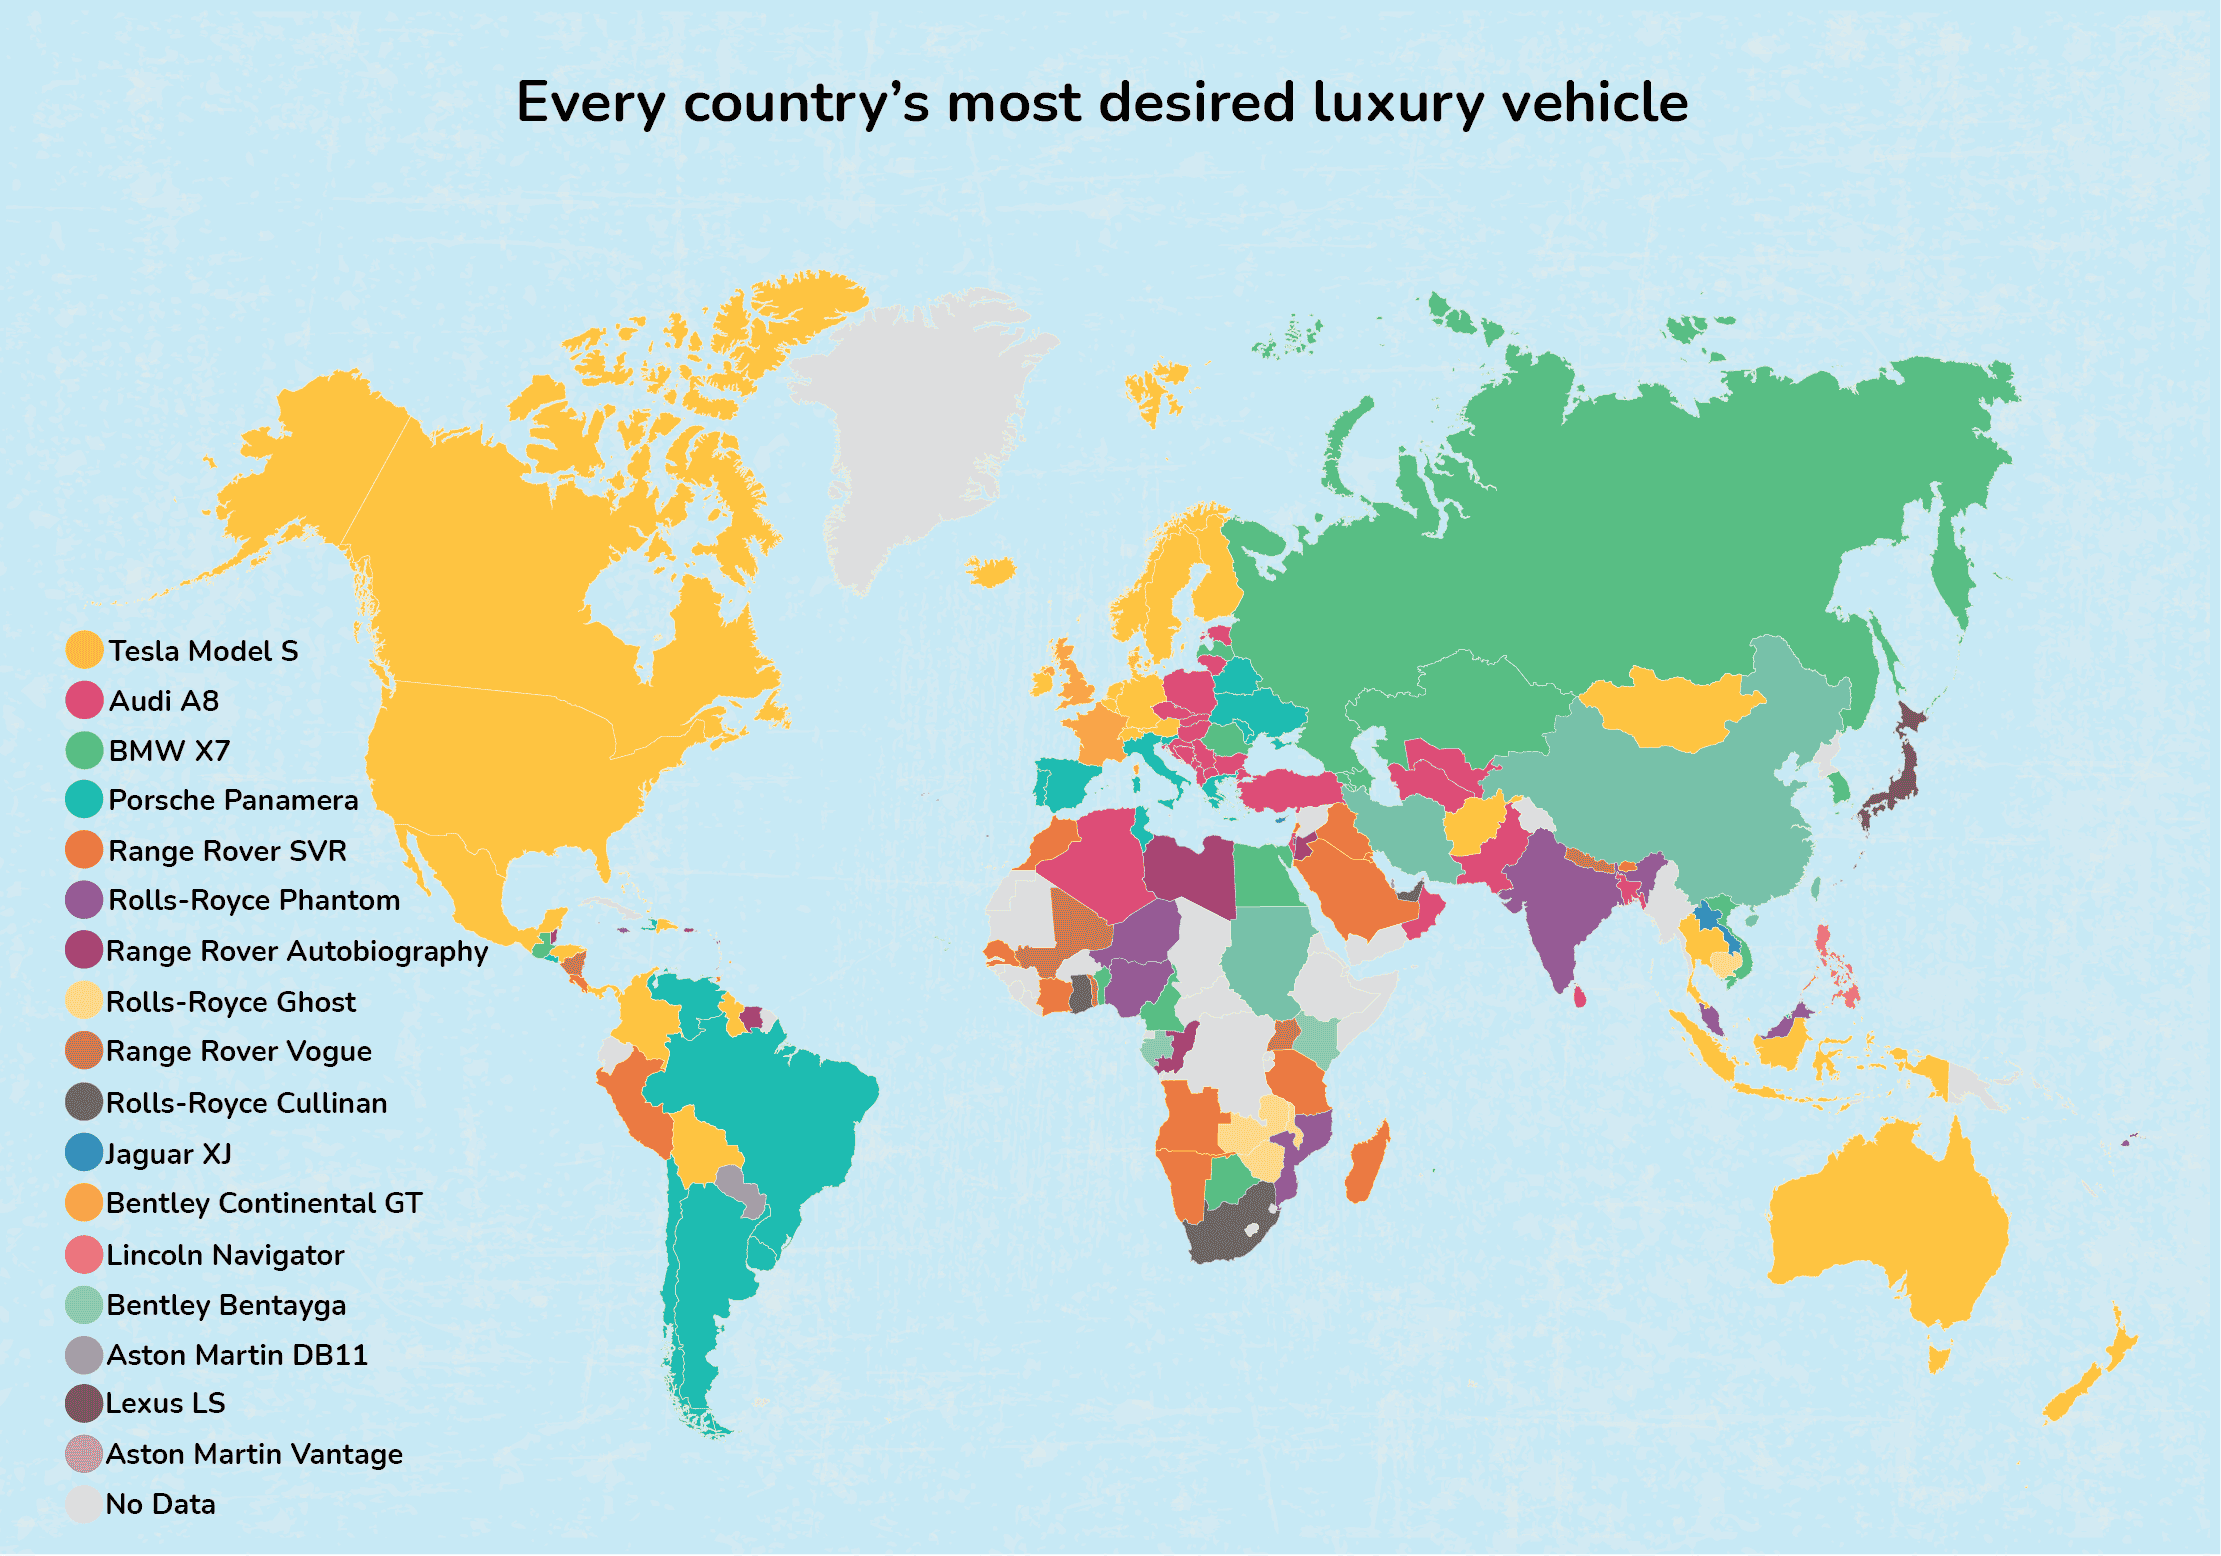 A map showing every country's most desired luxury car.